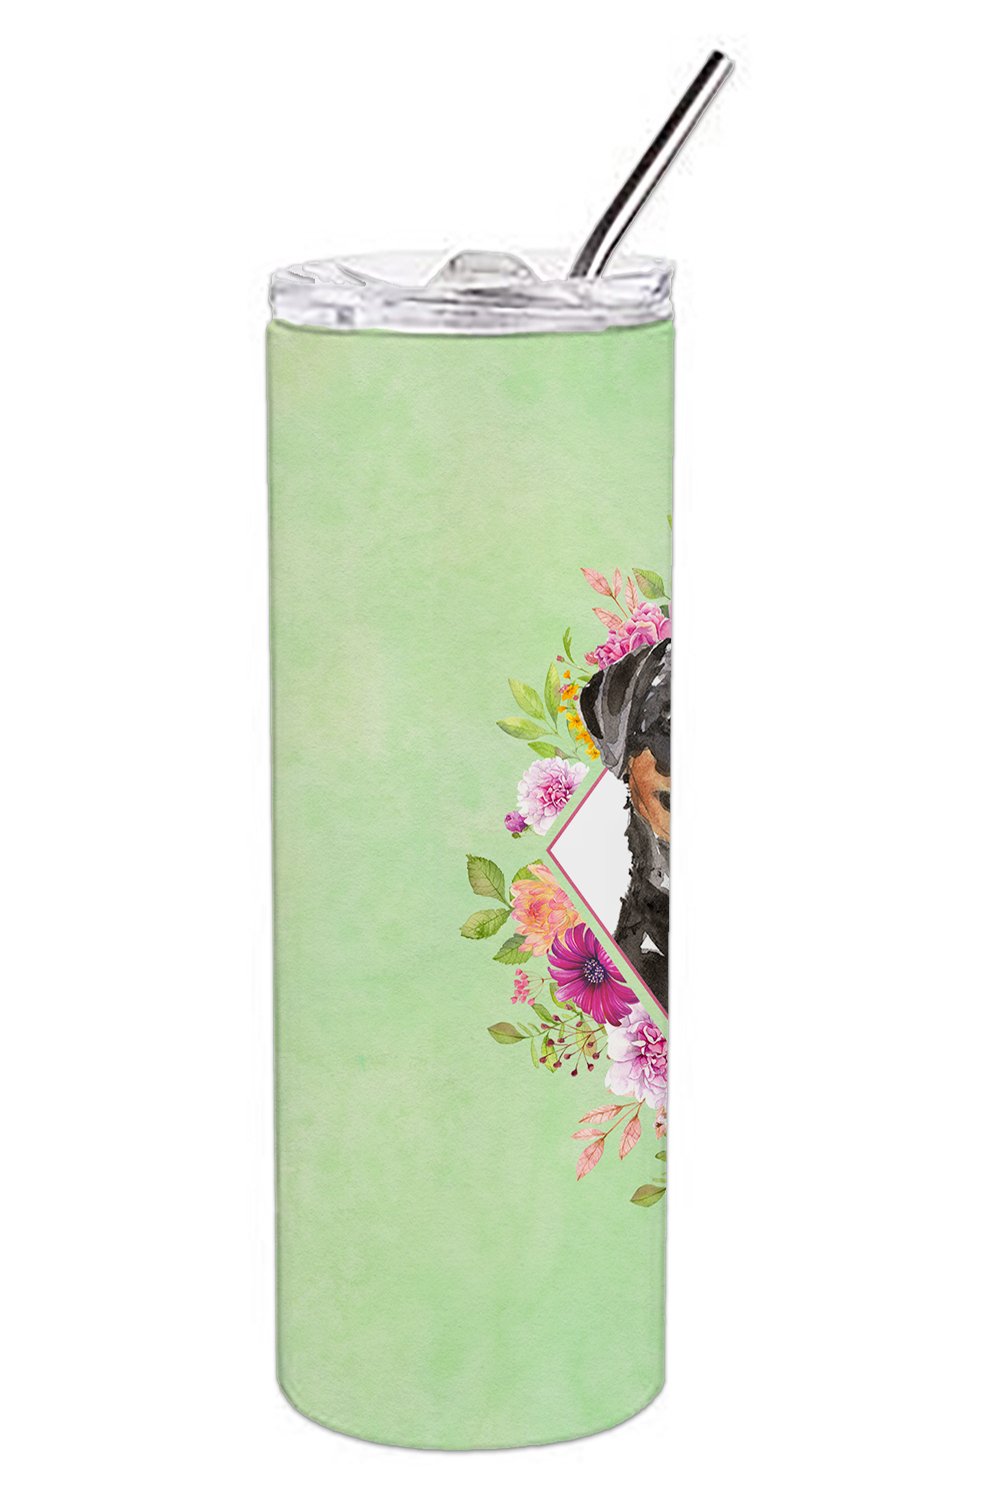 Rottweiler Green Flowers Double Walled Stainless Steel 20 oz Skinny Tumbler CK4377TBL20 by Caroline's Treasures